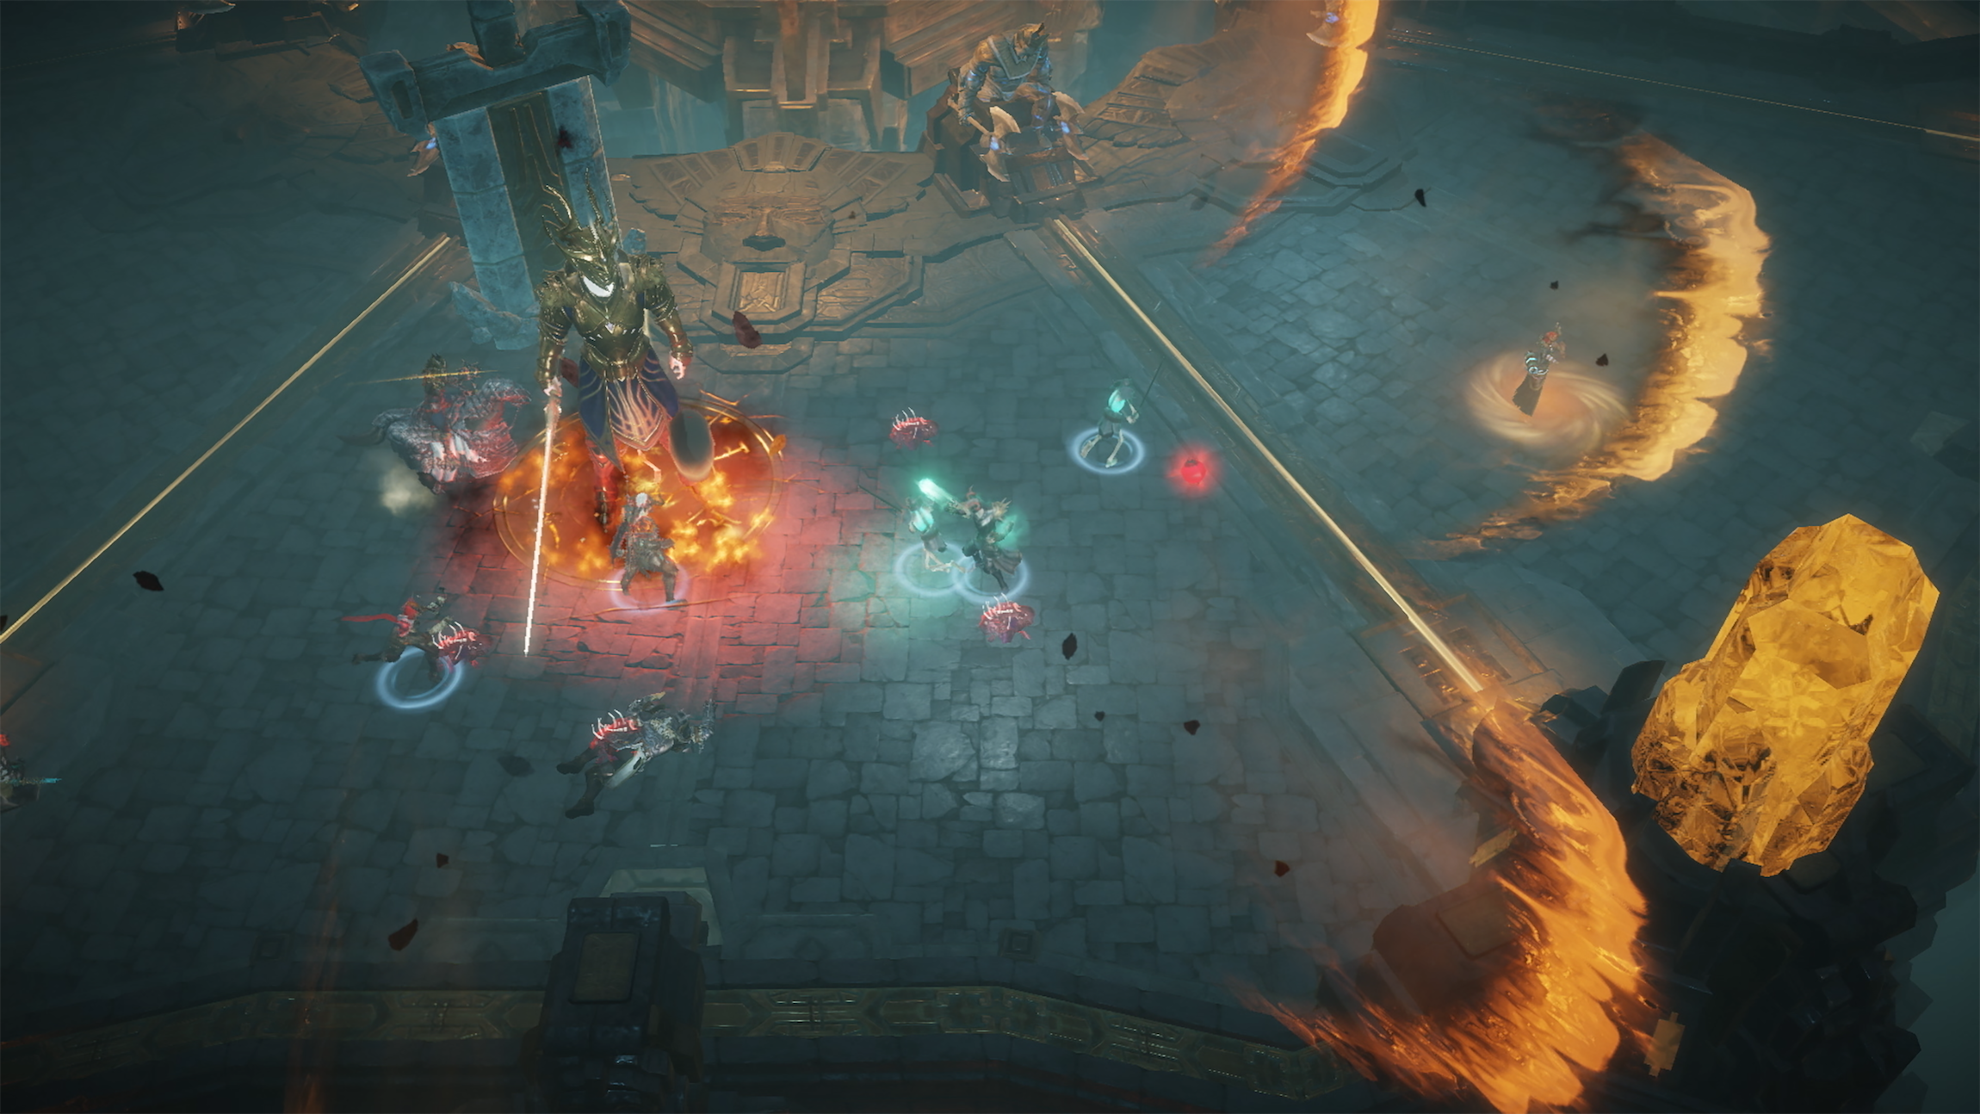 Diablo Immortal Factions: How to Join the Immortals, Shadows, and